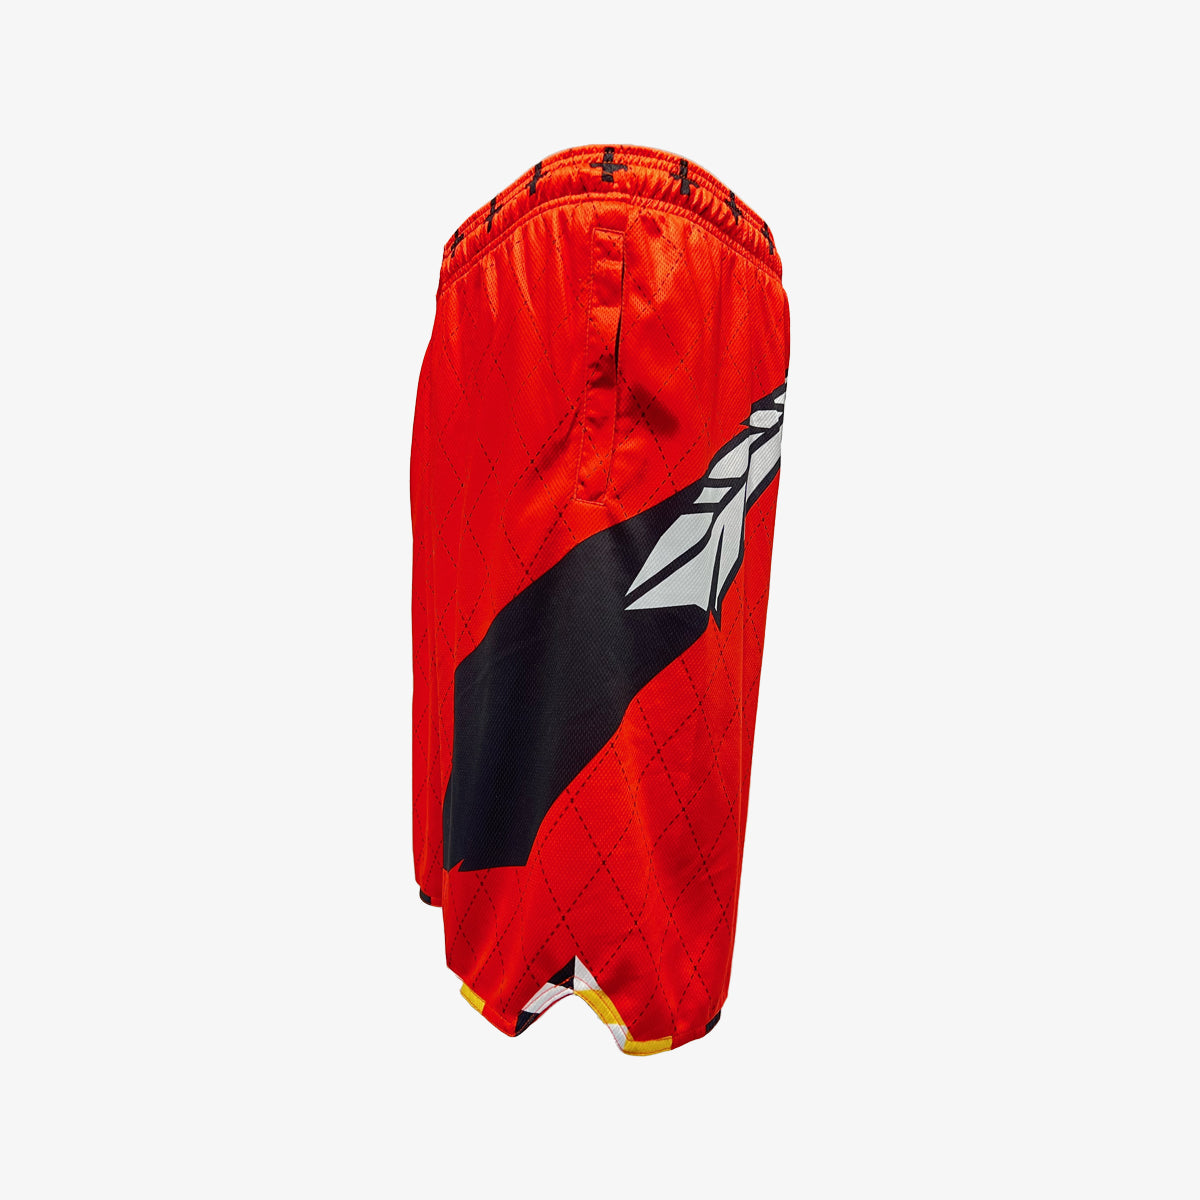 Feather Basketball Shorts